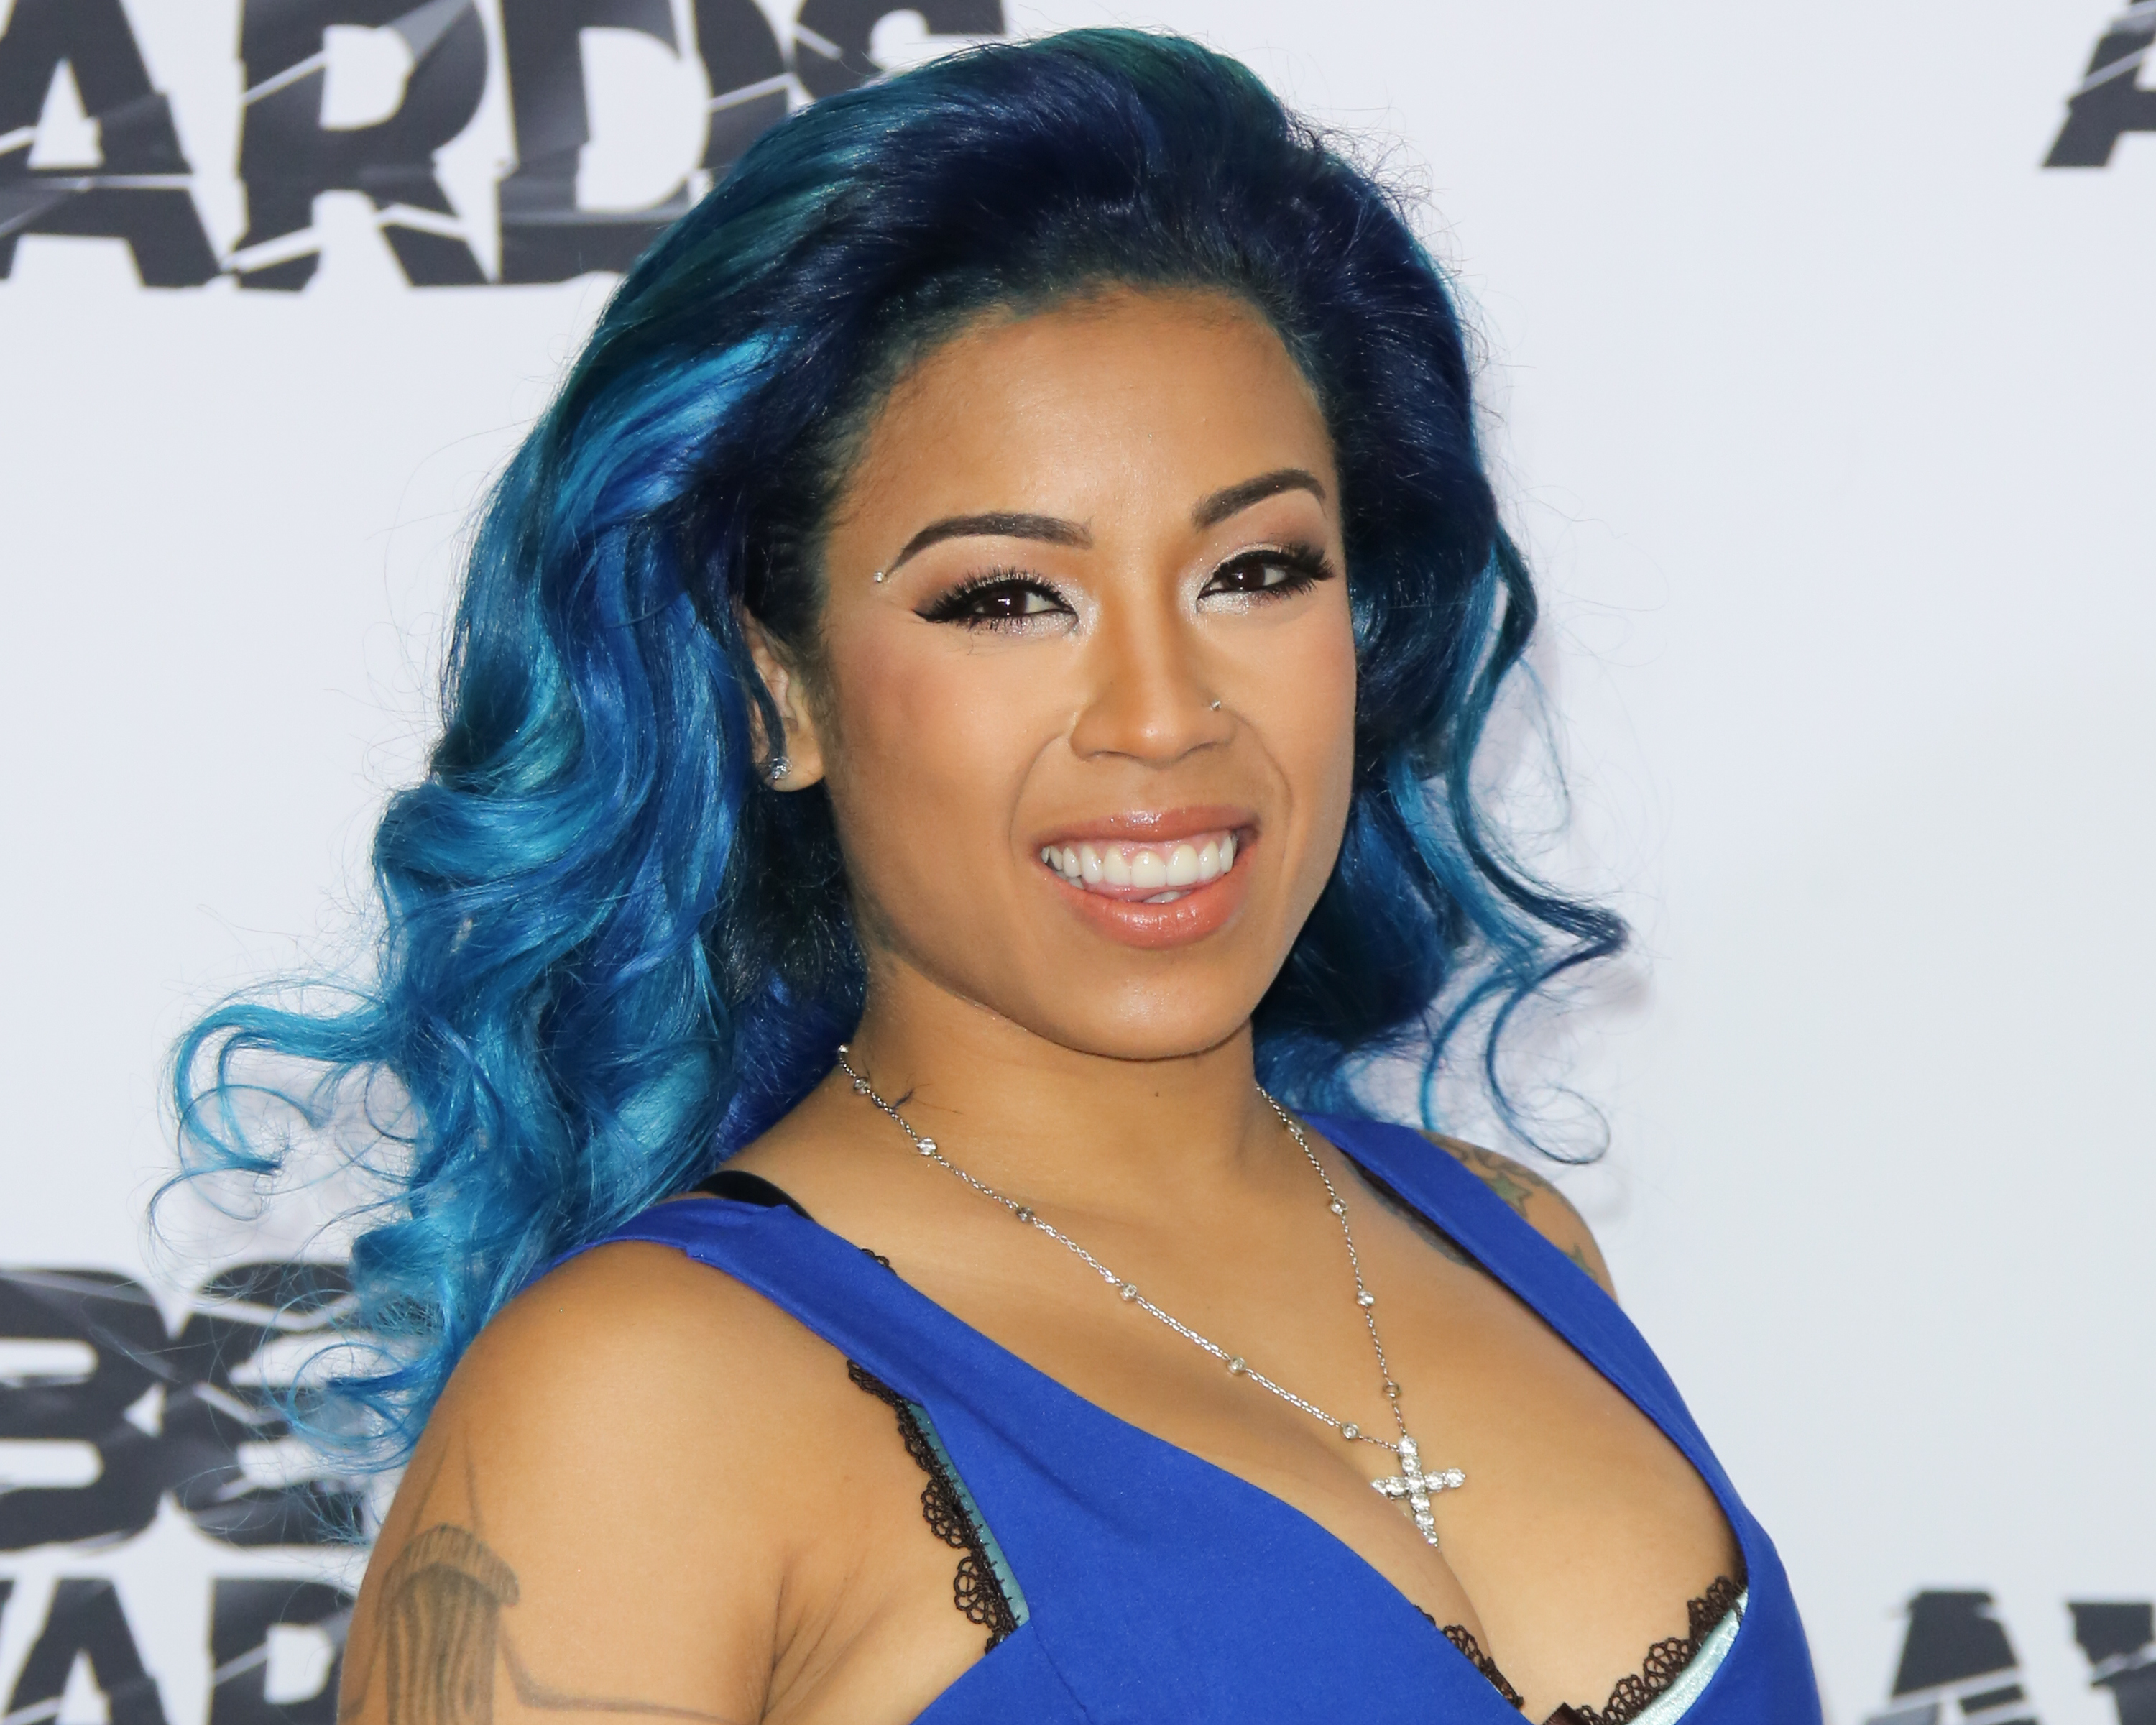 Keyshia Cole Dumped By Antonio Brown Shortly After She Gets AB Tattoo On  Her Back  The SportsGrail